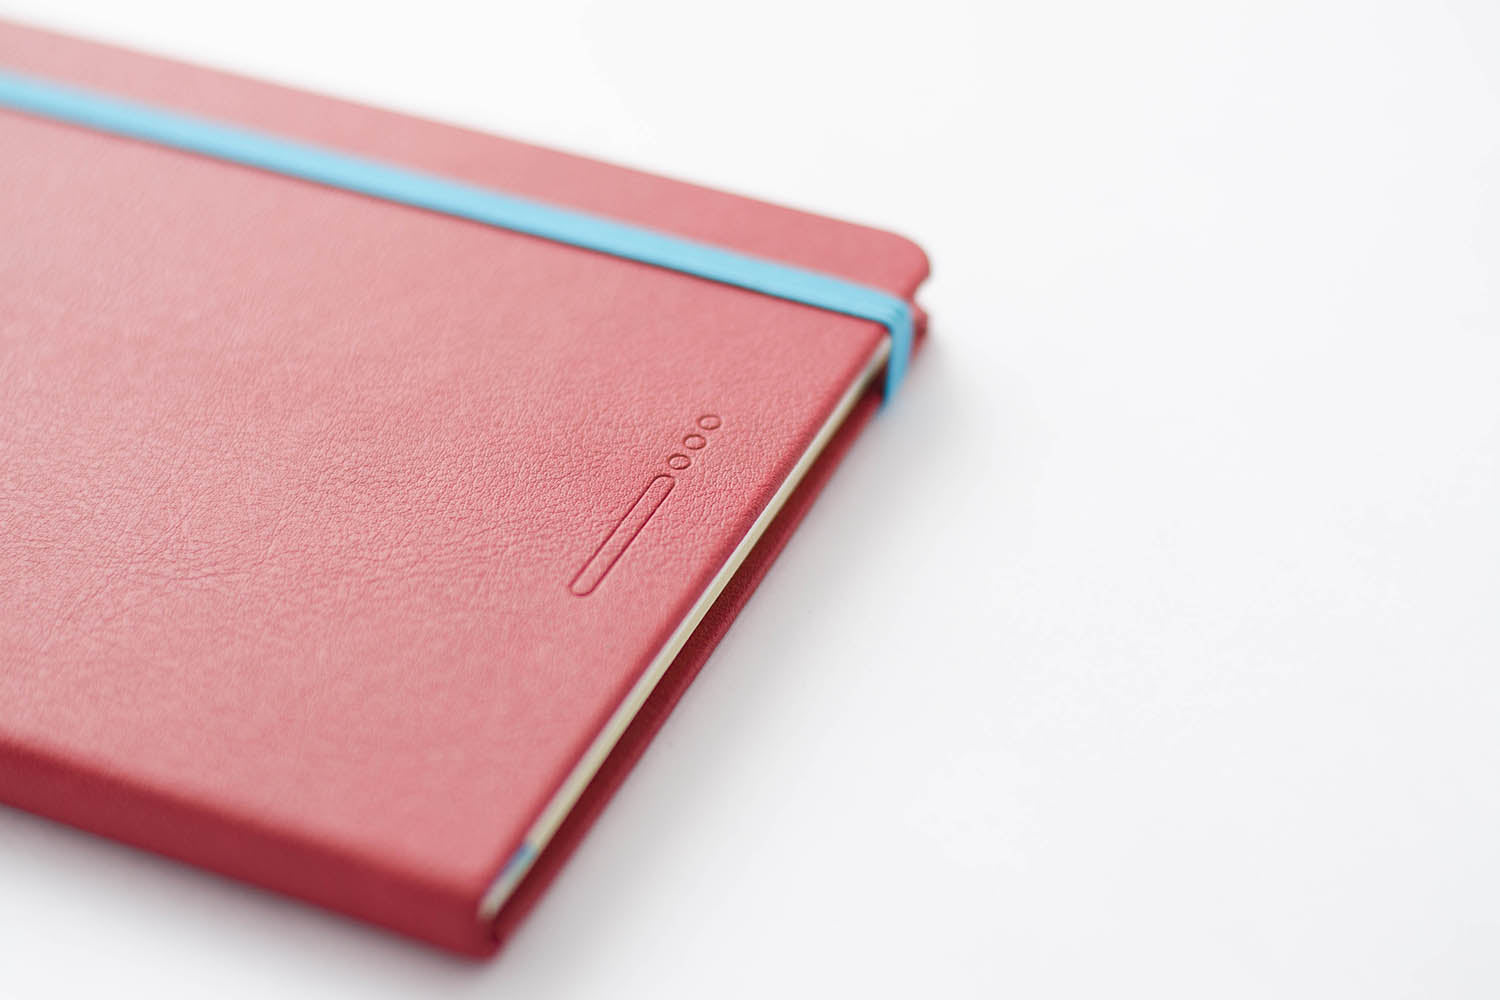 Endless Recorder Notebook - Crimson Sky Red | Pen Venture - Passionf for Luxury